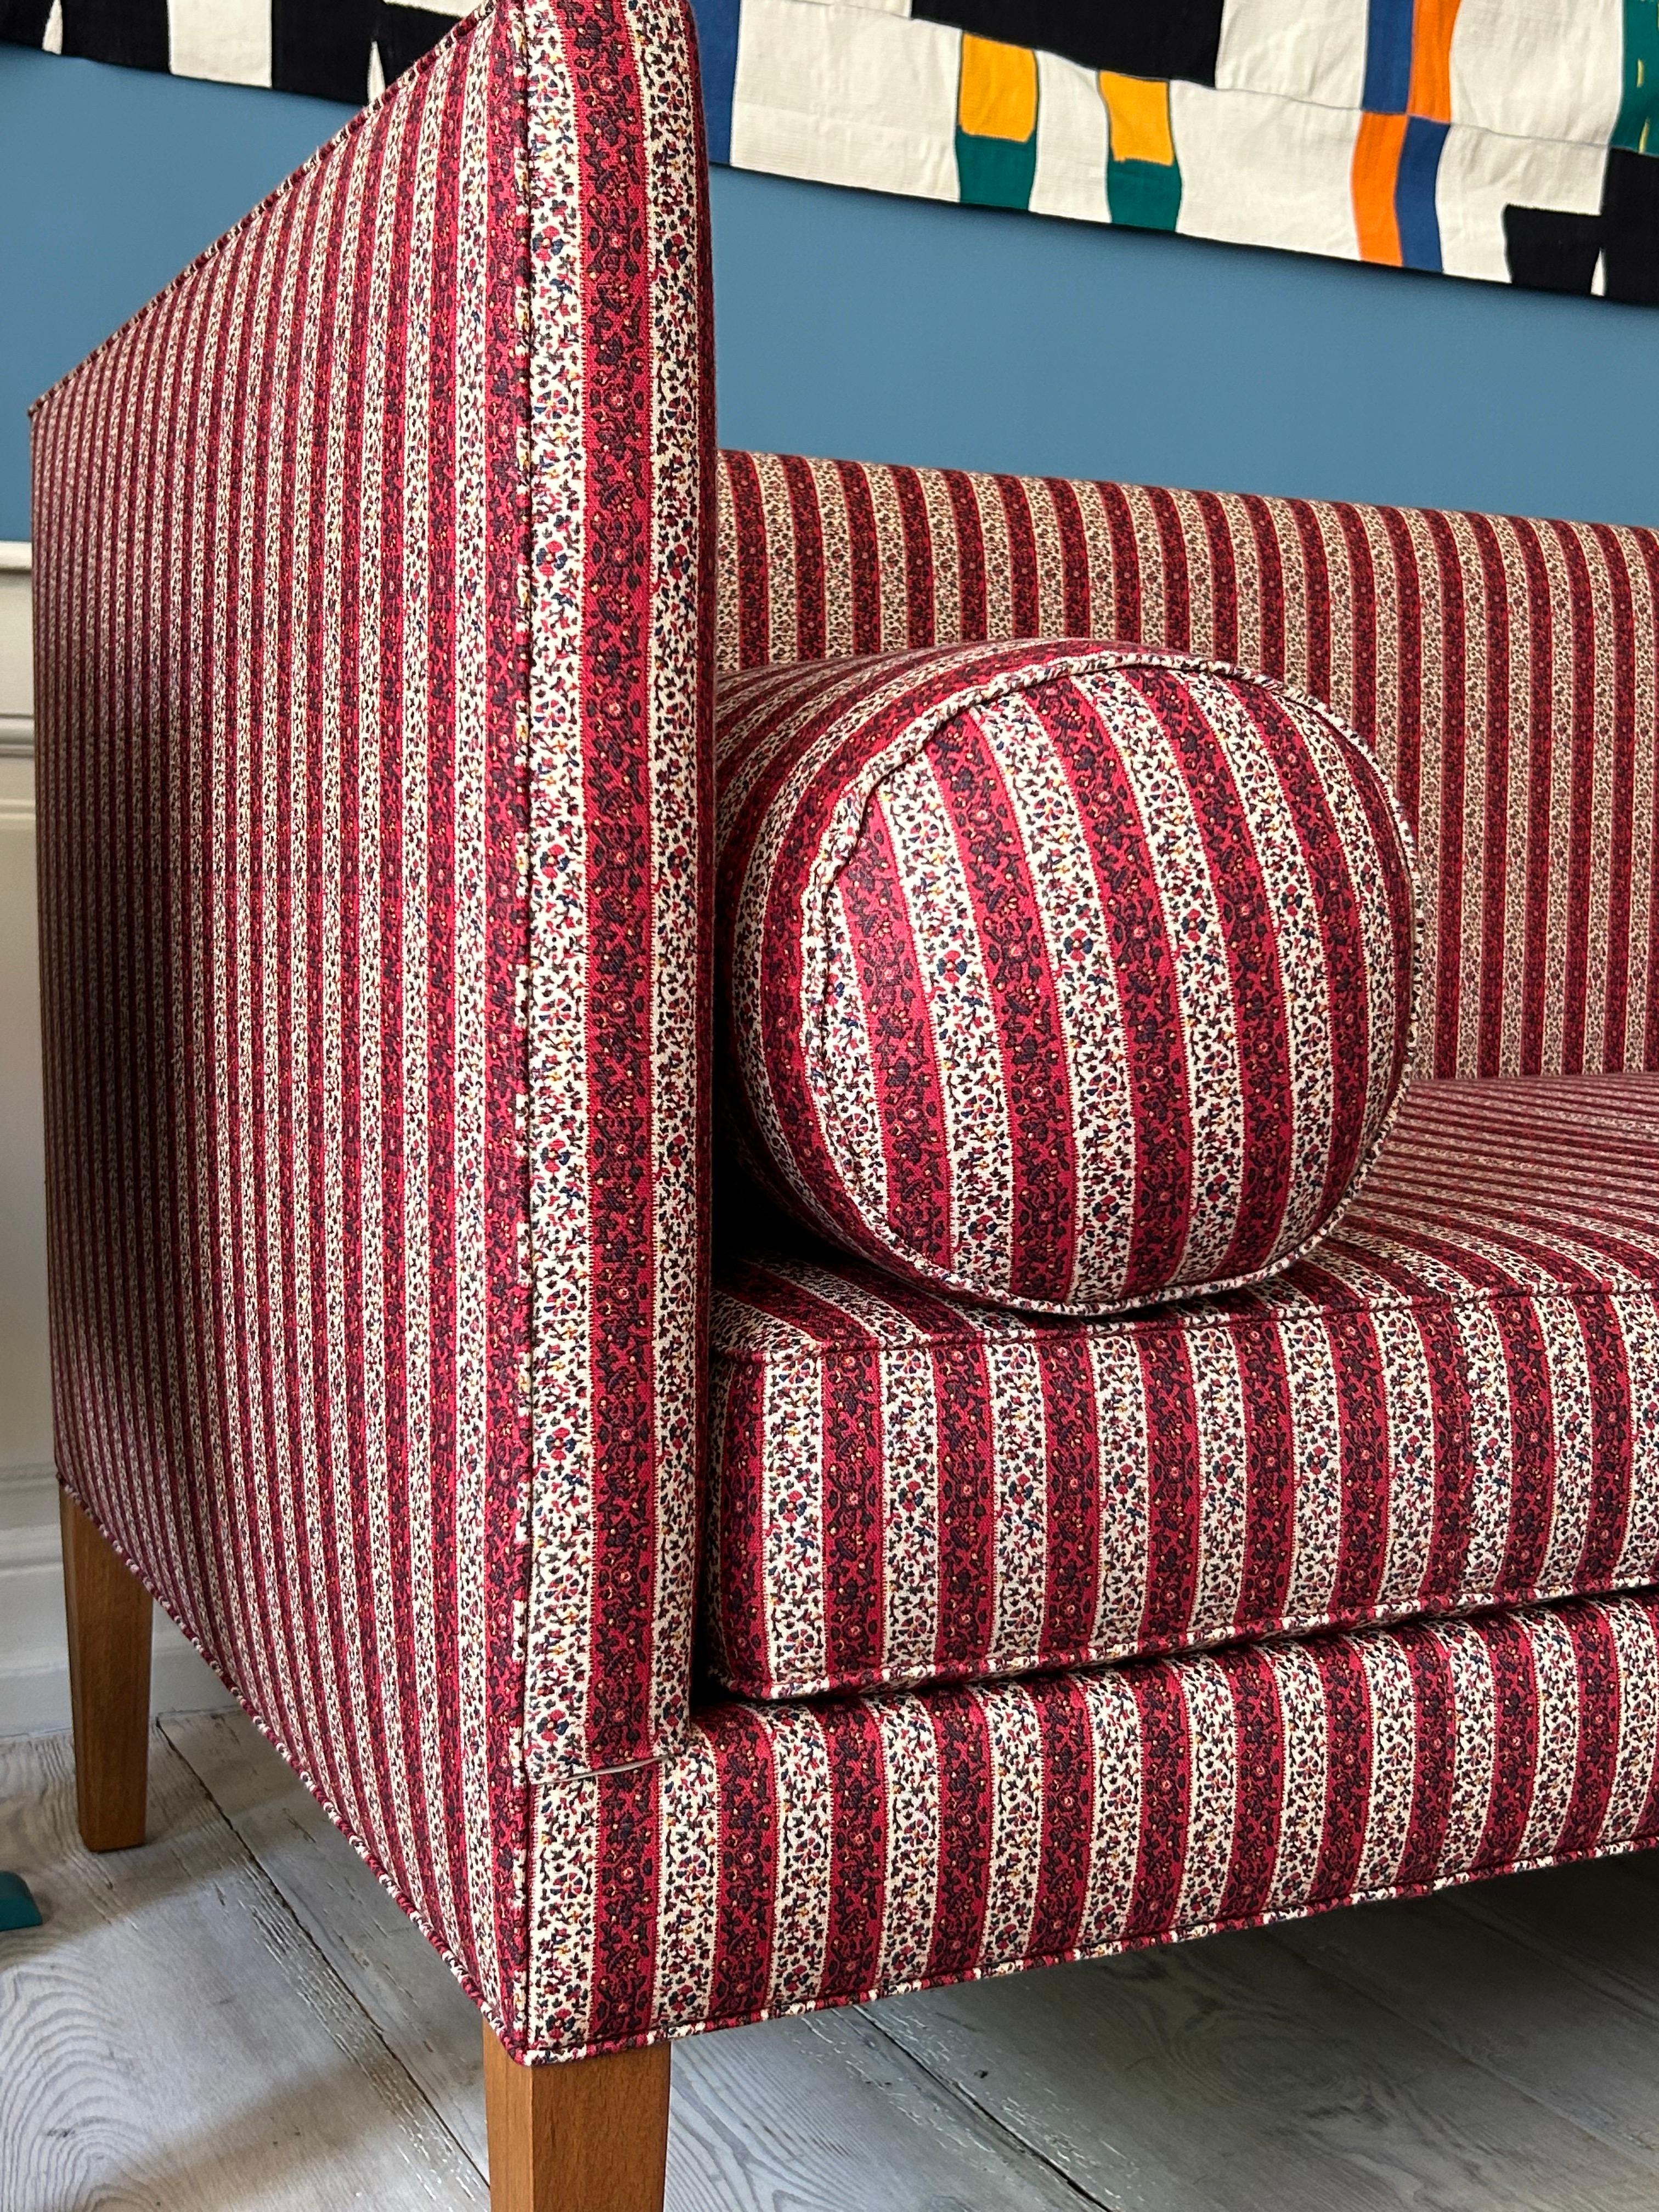 Belgian Contemporary Sofa in Customized Striped Red Upholstery by the Apartment, Belgium For Sale